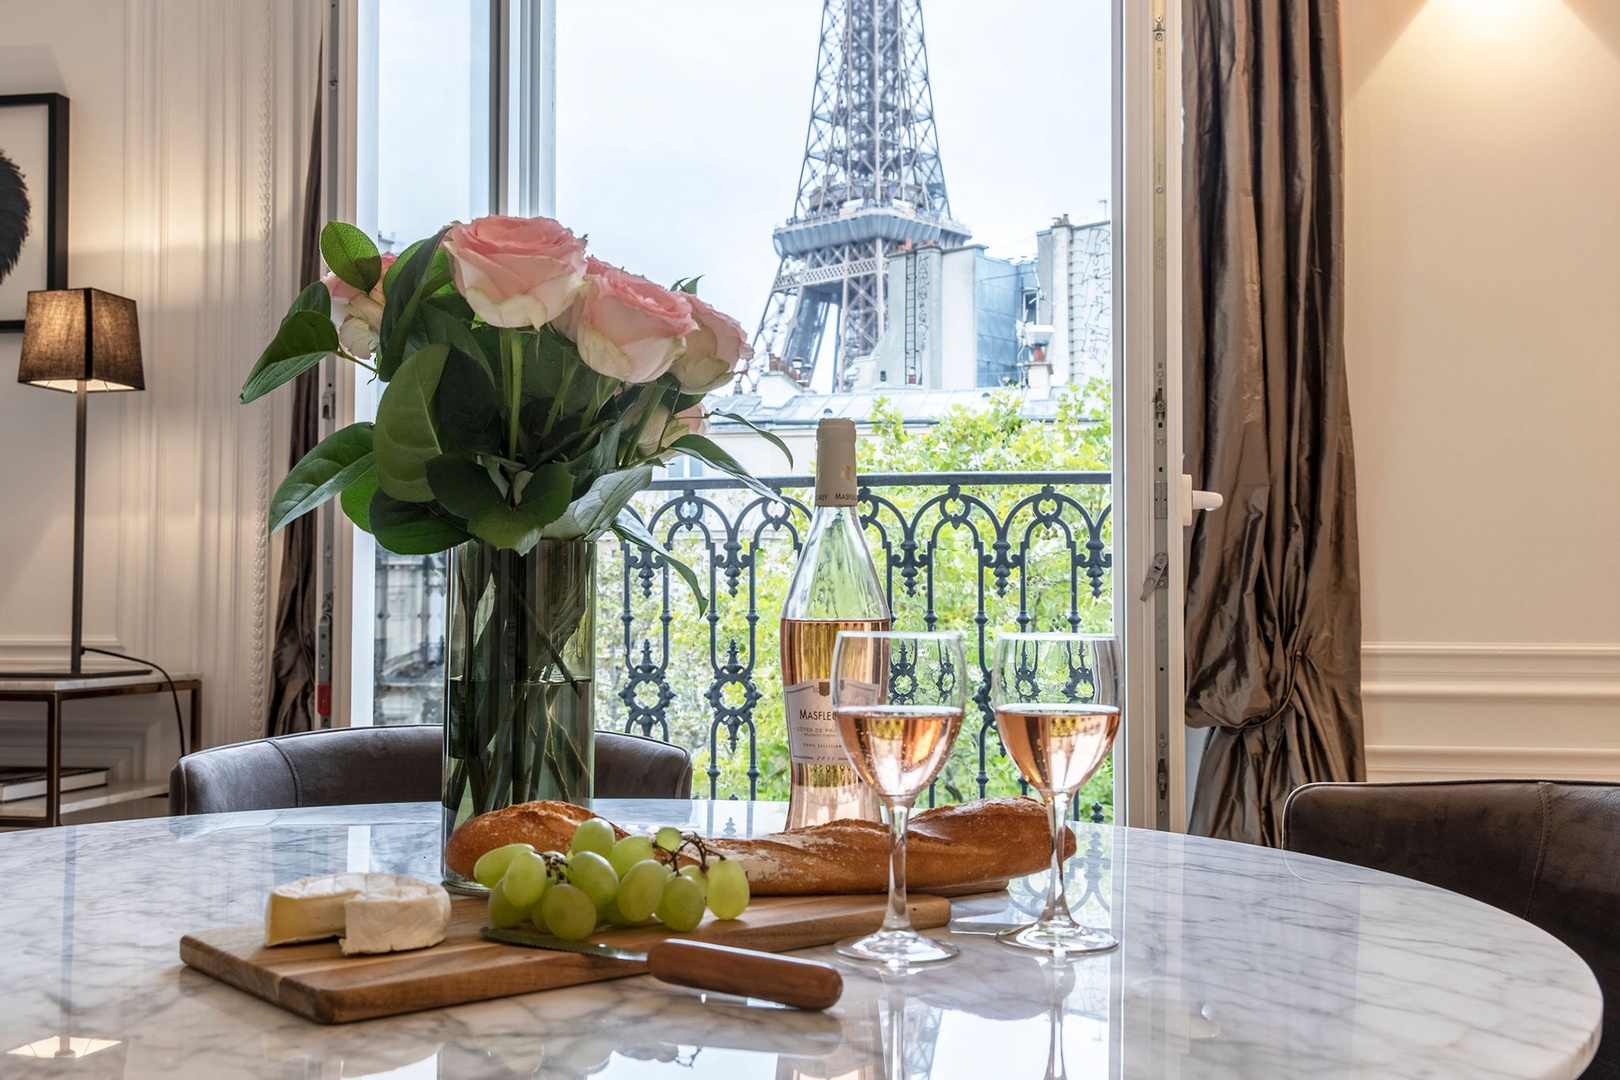 Breakfast with an unforgettable view!